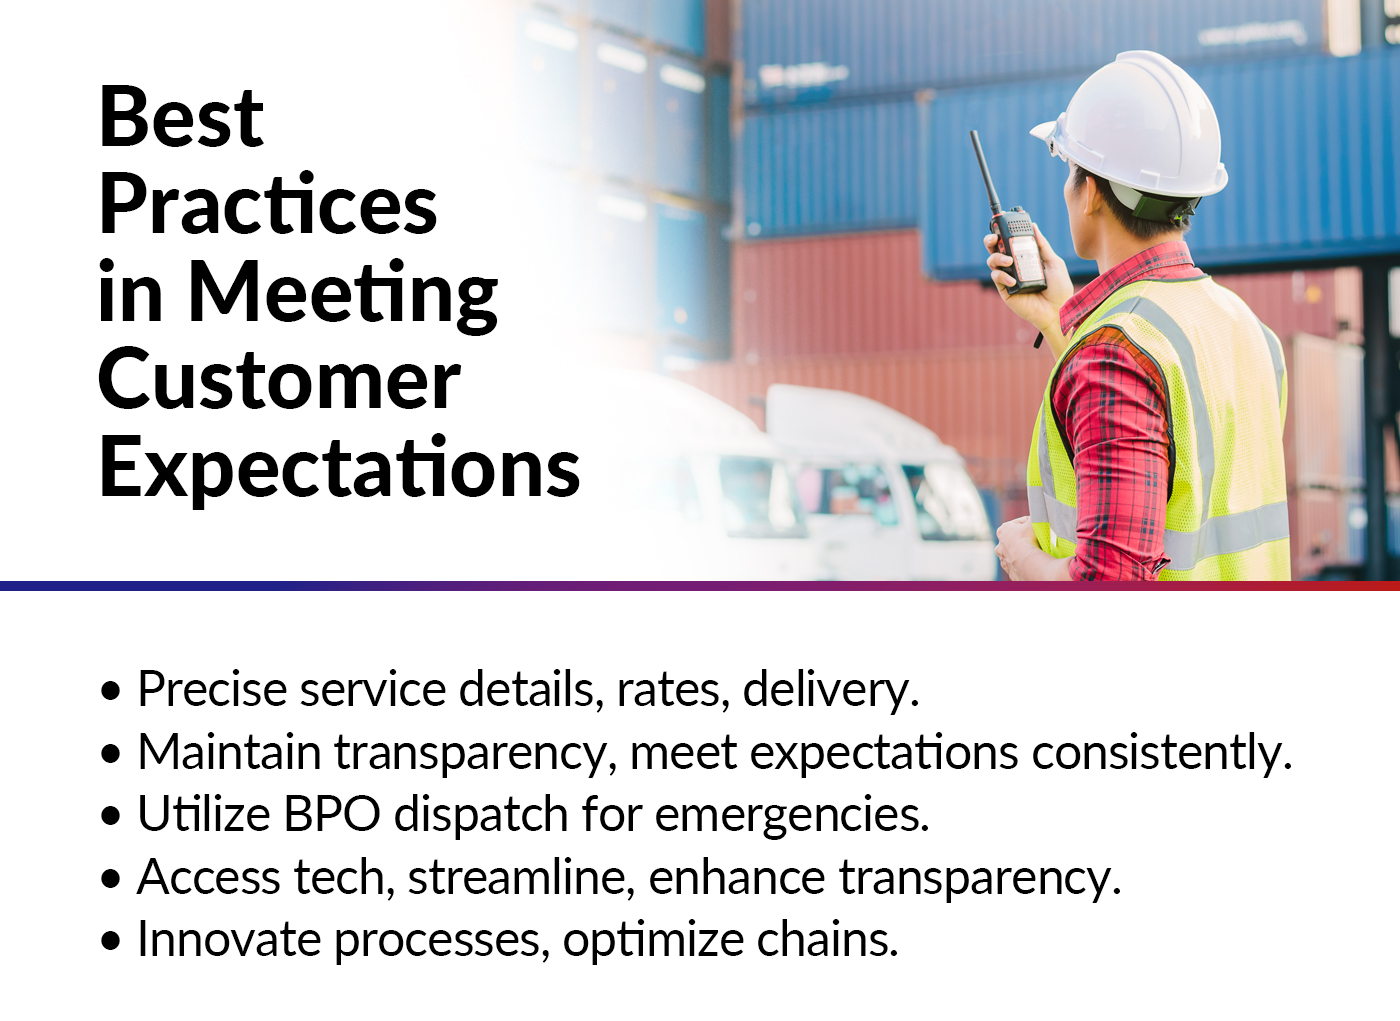 A mini infographic shows the best practices in meeting customer expectations for transport and logistics